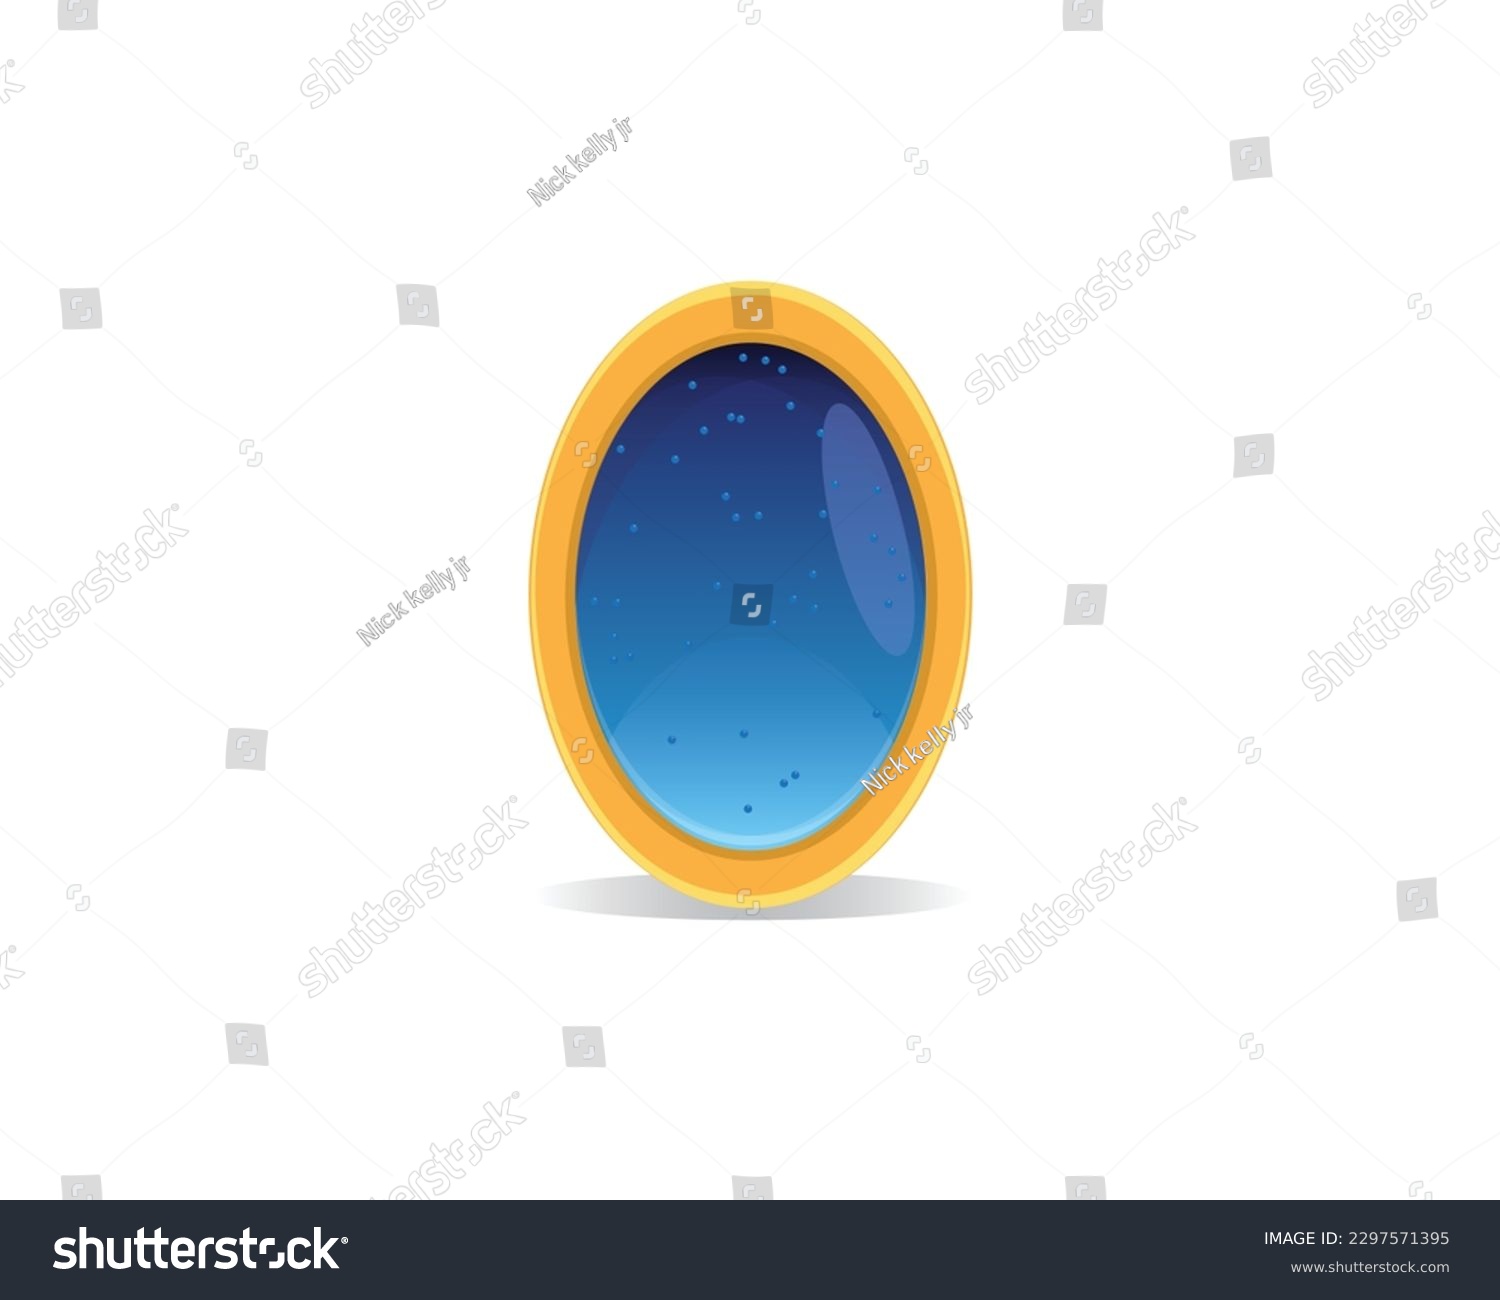 SVG of vector design of an oval-shaped precious stone or precious stone object blue diamond set in a container made of yellow gold on the sides which are also oval svg